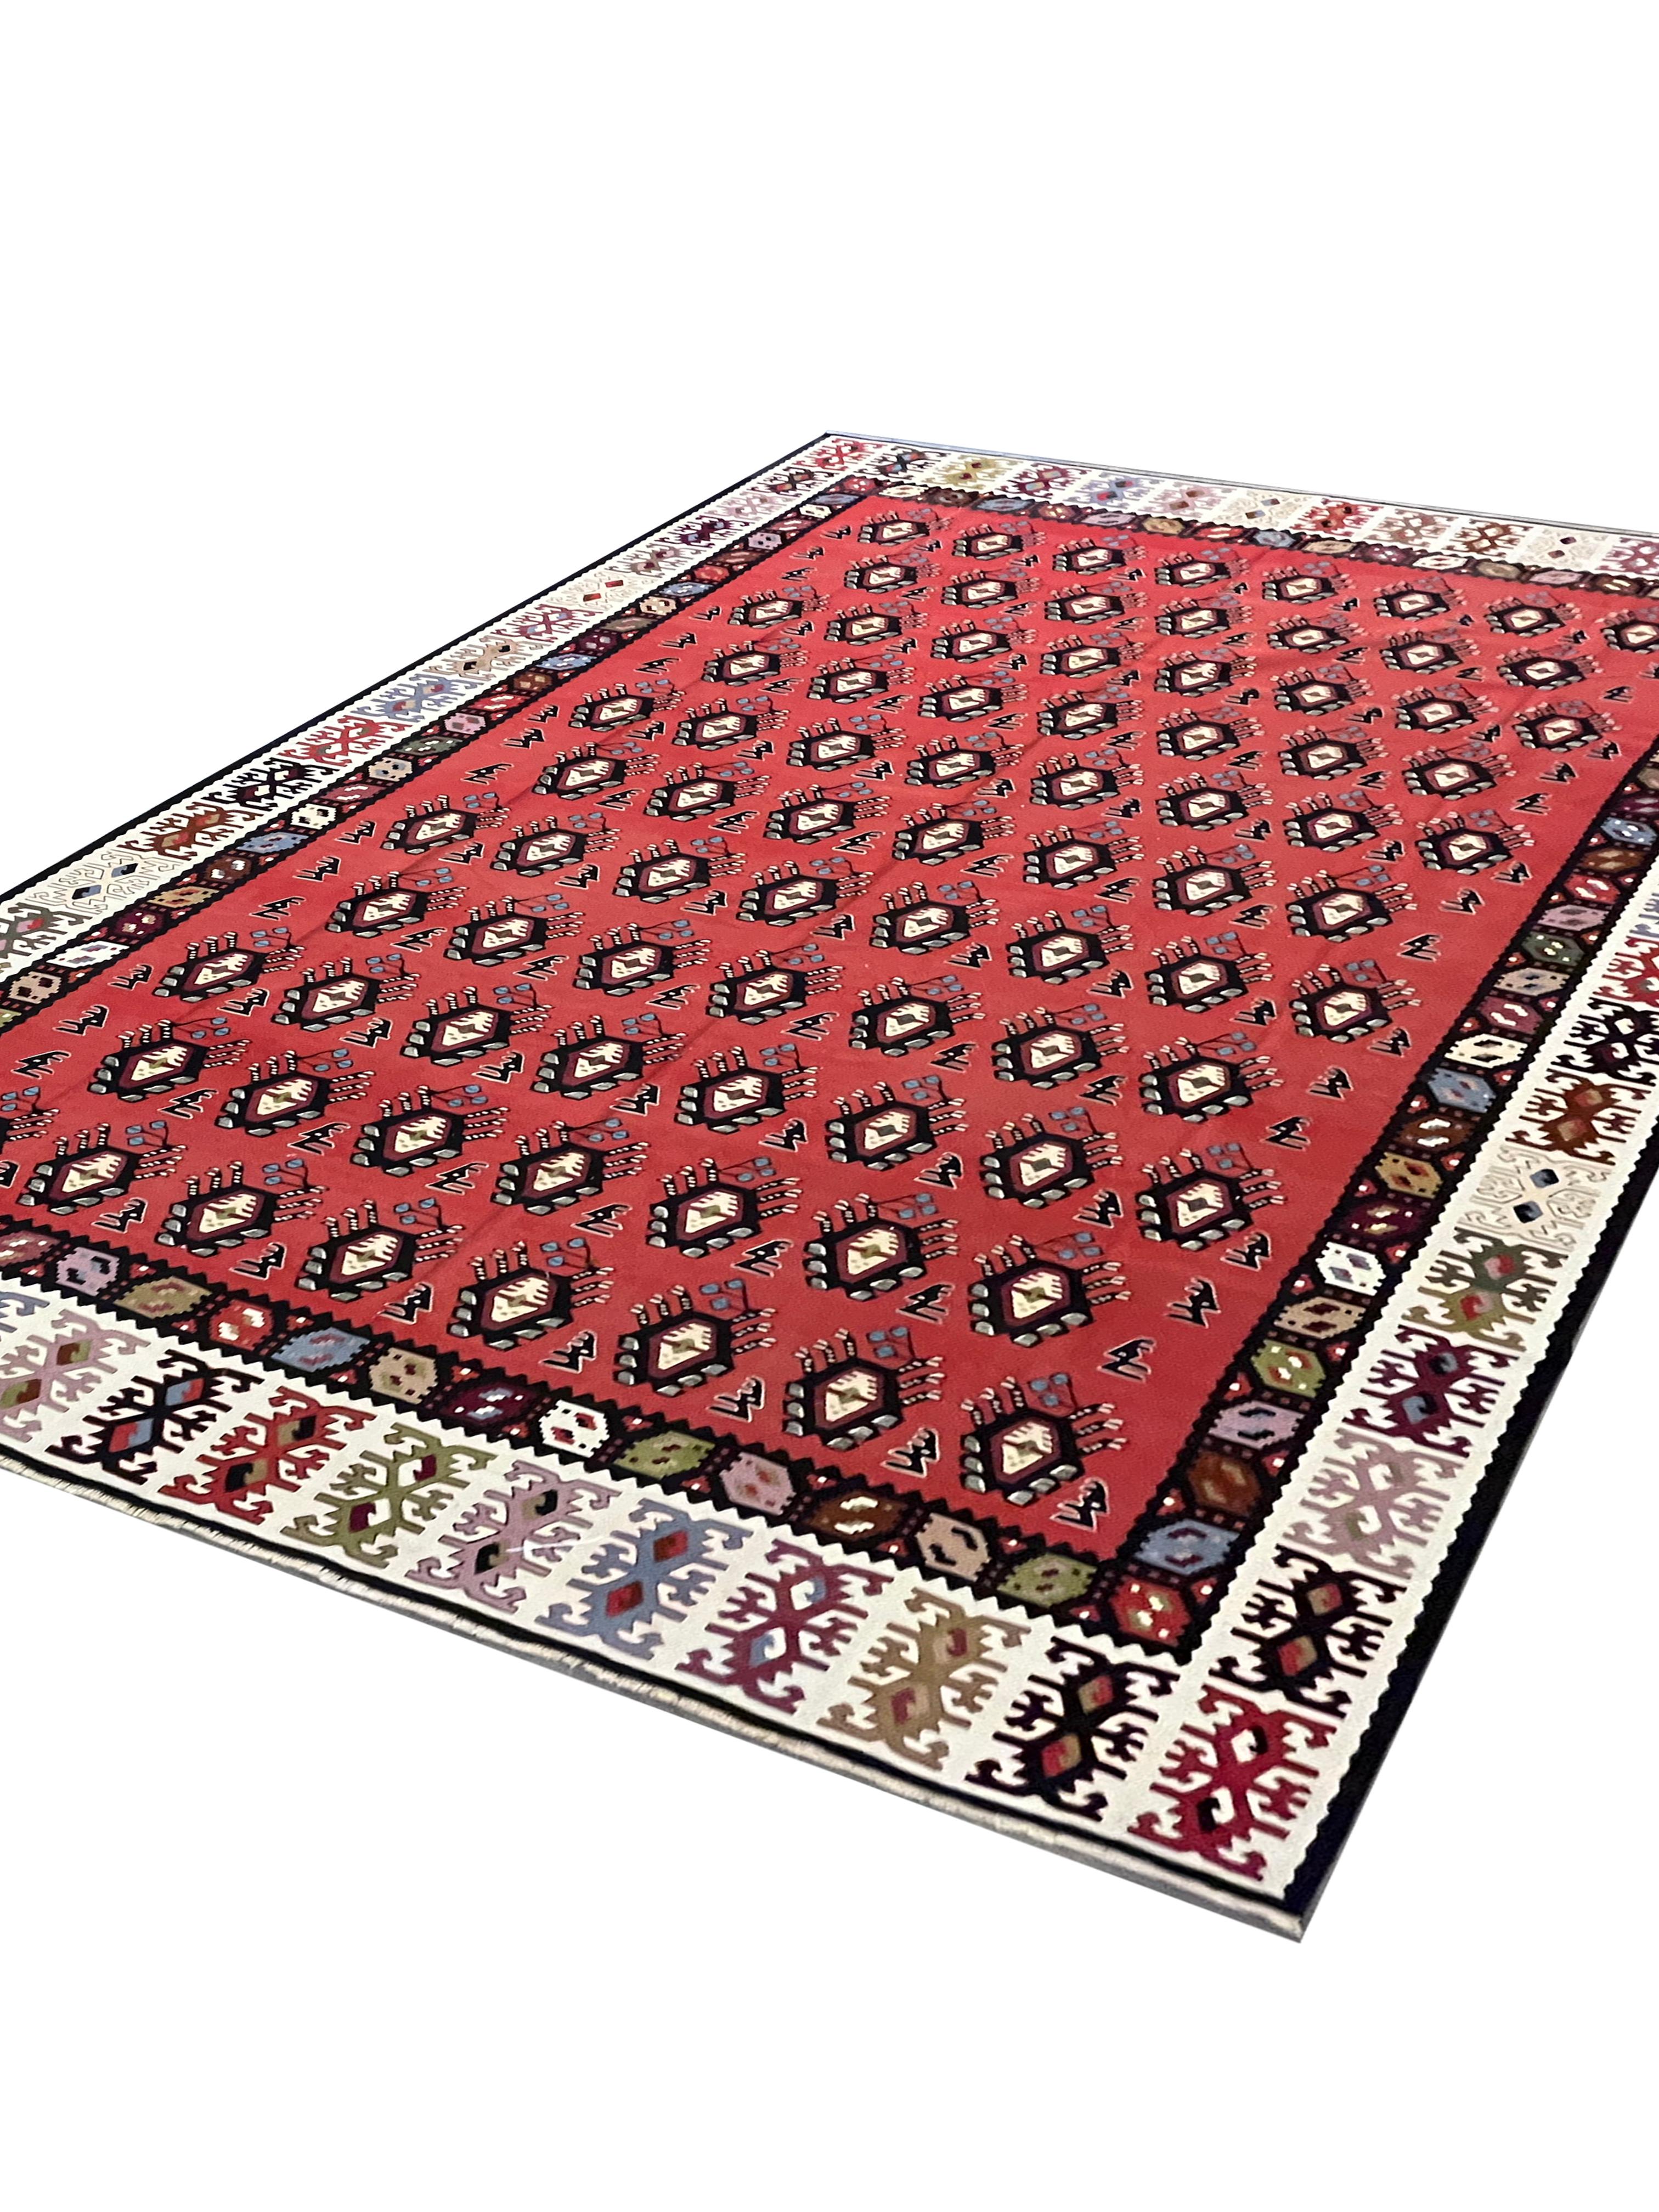 Hand-Knotted Antique Turkish Kilim Rug Handmade Modern Red Striped Pirot Kilims For Sale